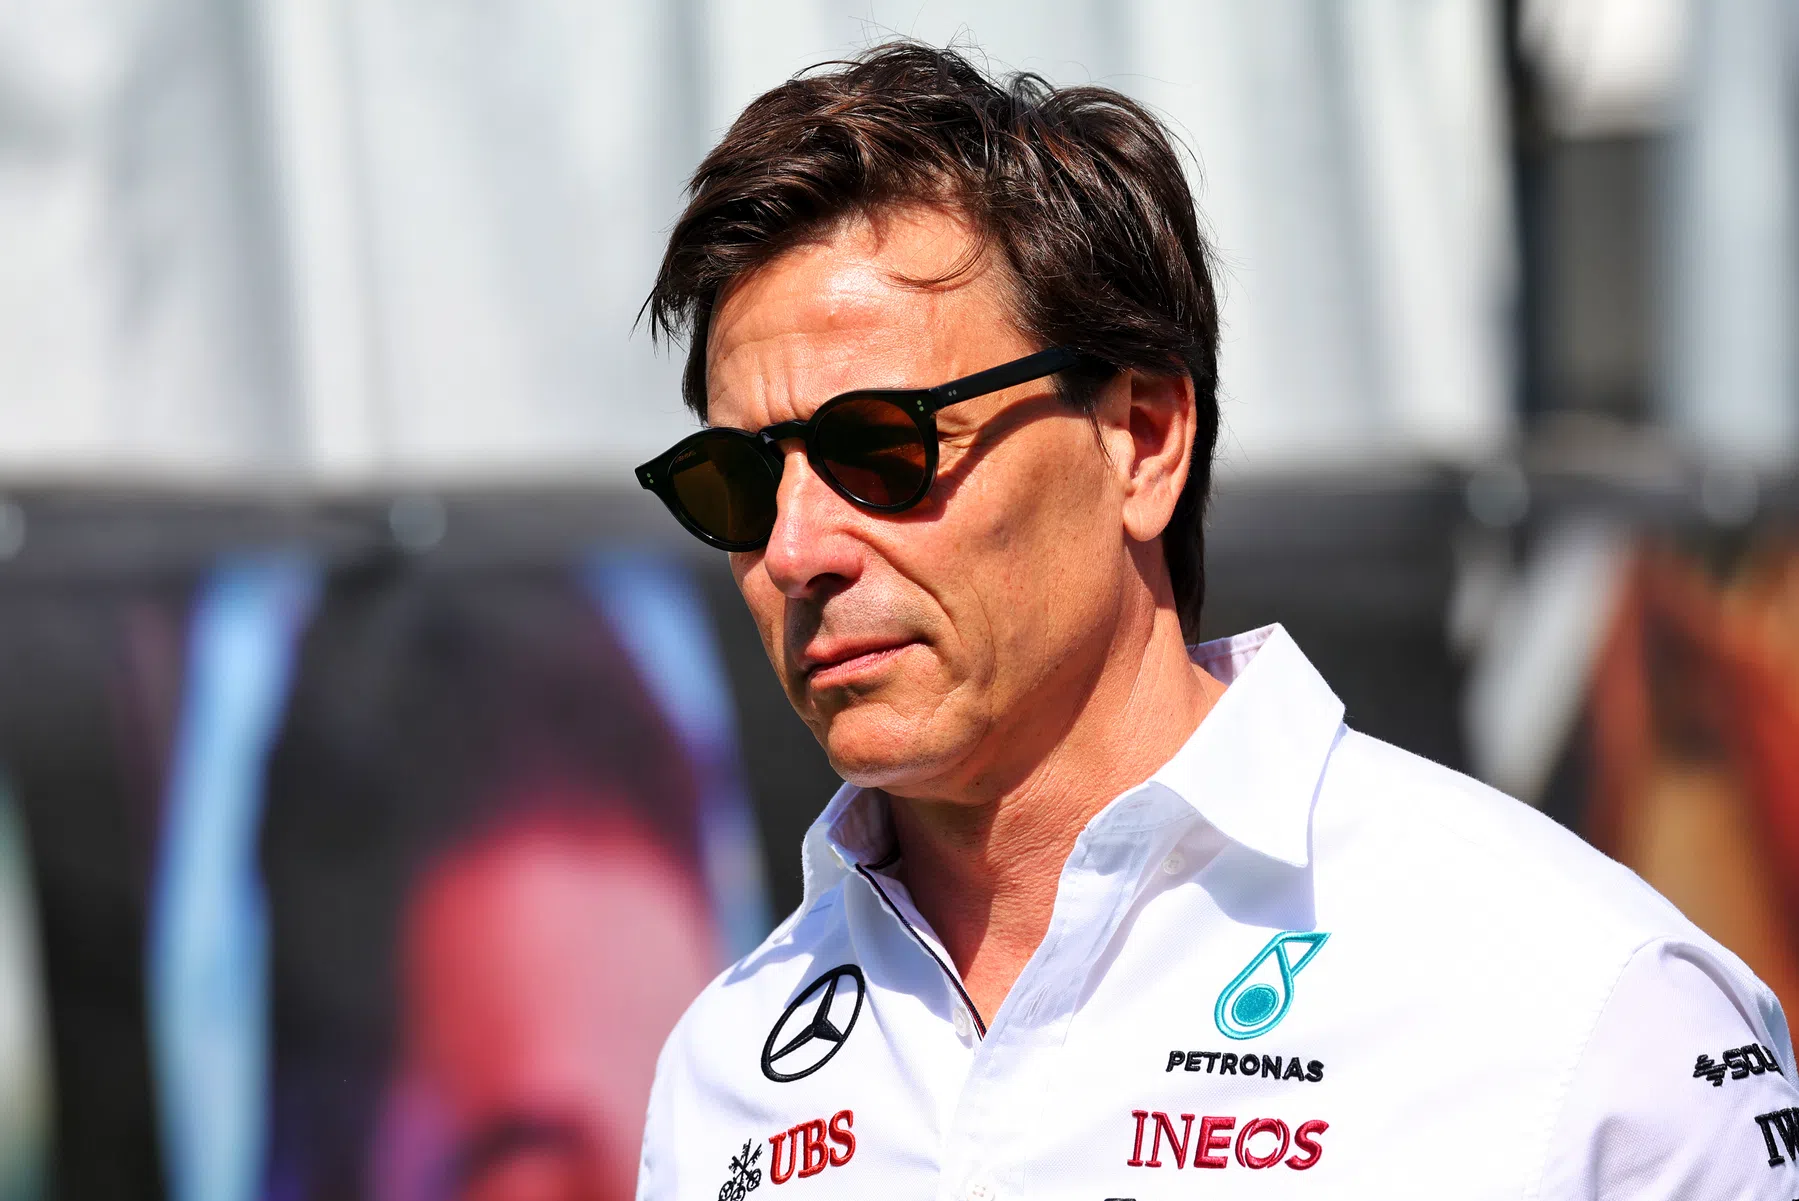 Toto Wolff thinks an accident is waiting to happen after Hamilton contact